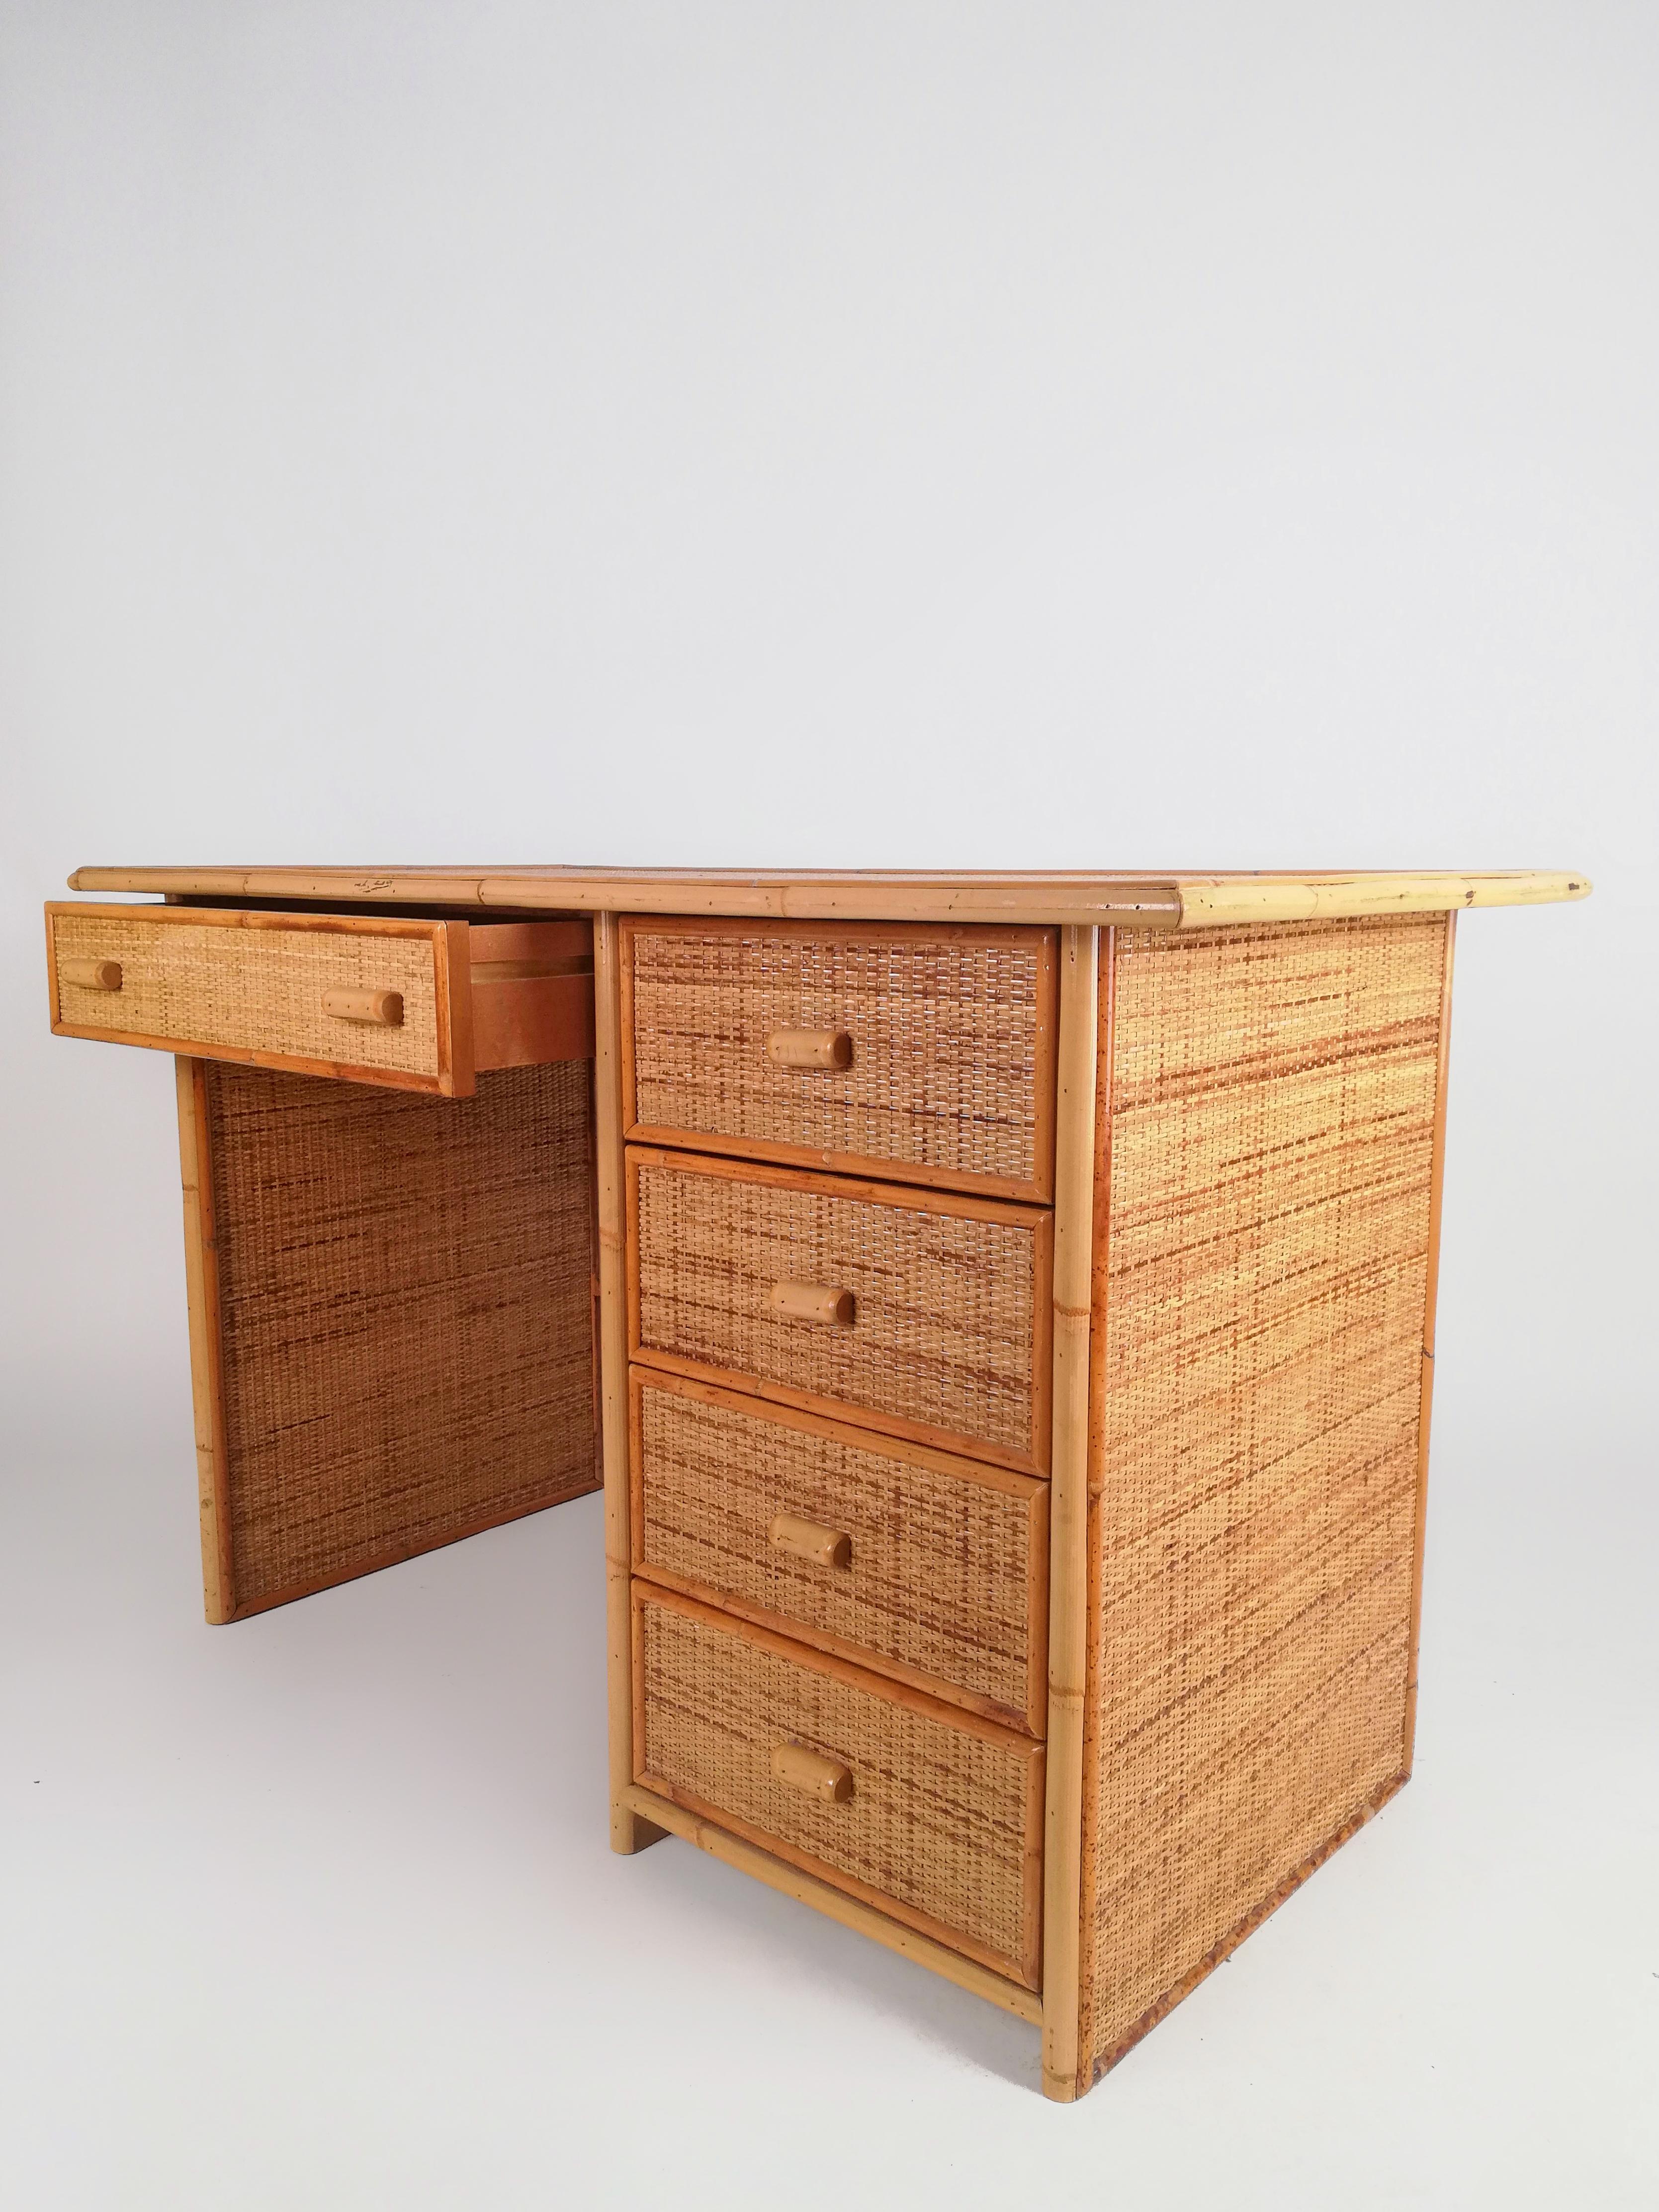 20th Century Vintage Italian Writing Desk with Drawers in Bamboo, Rattan and Plywood, 1970s For Sale